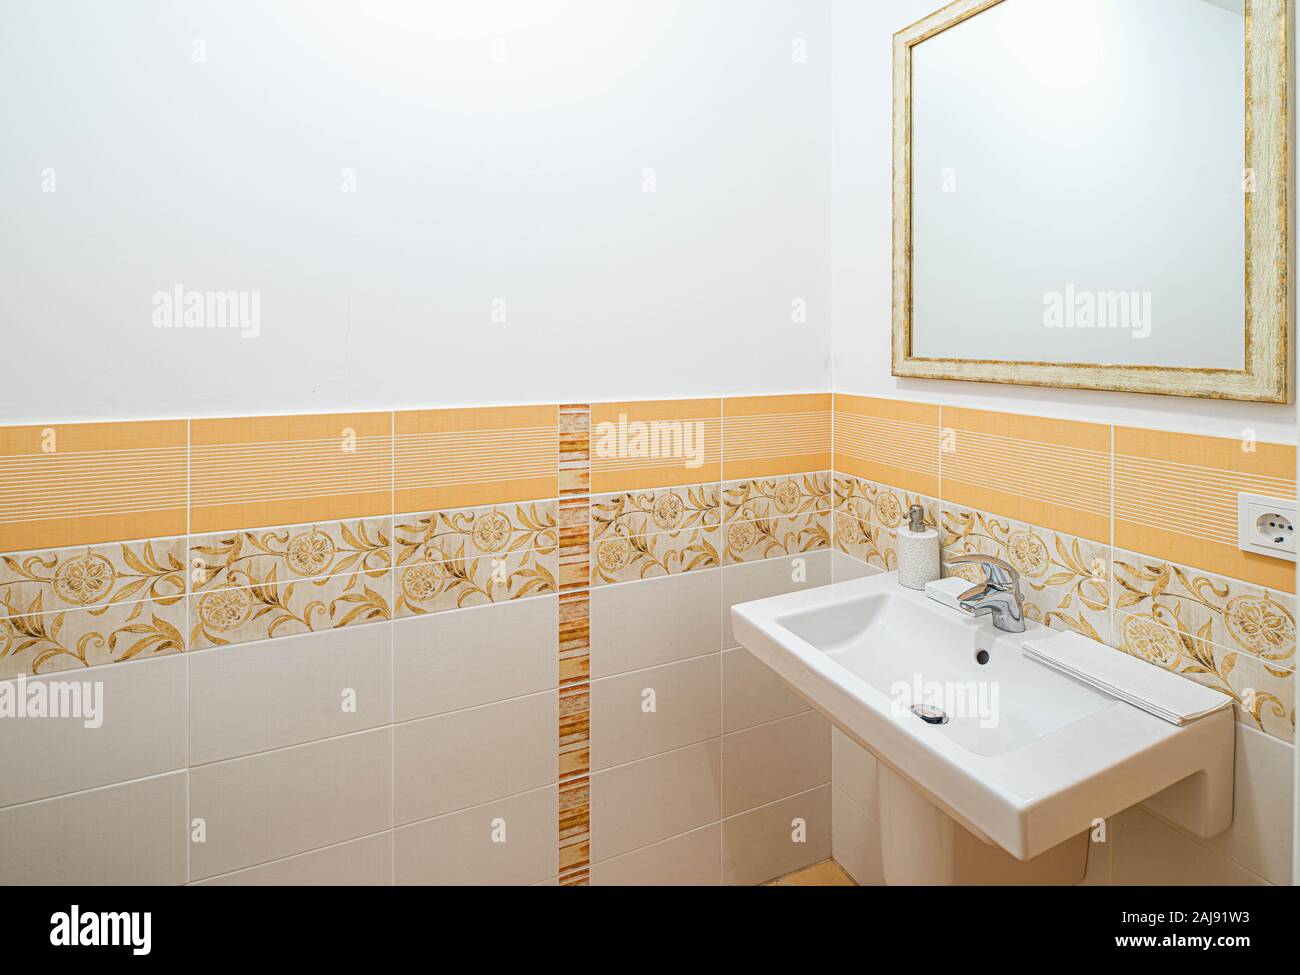 White sink and mirror in bathroom. Light peach tile on the wall. Stock Photo